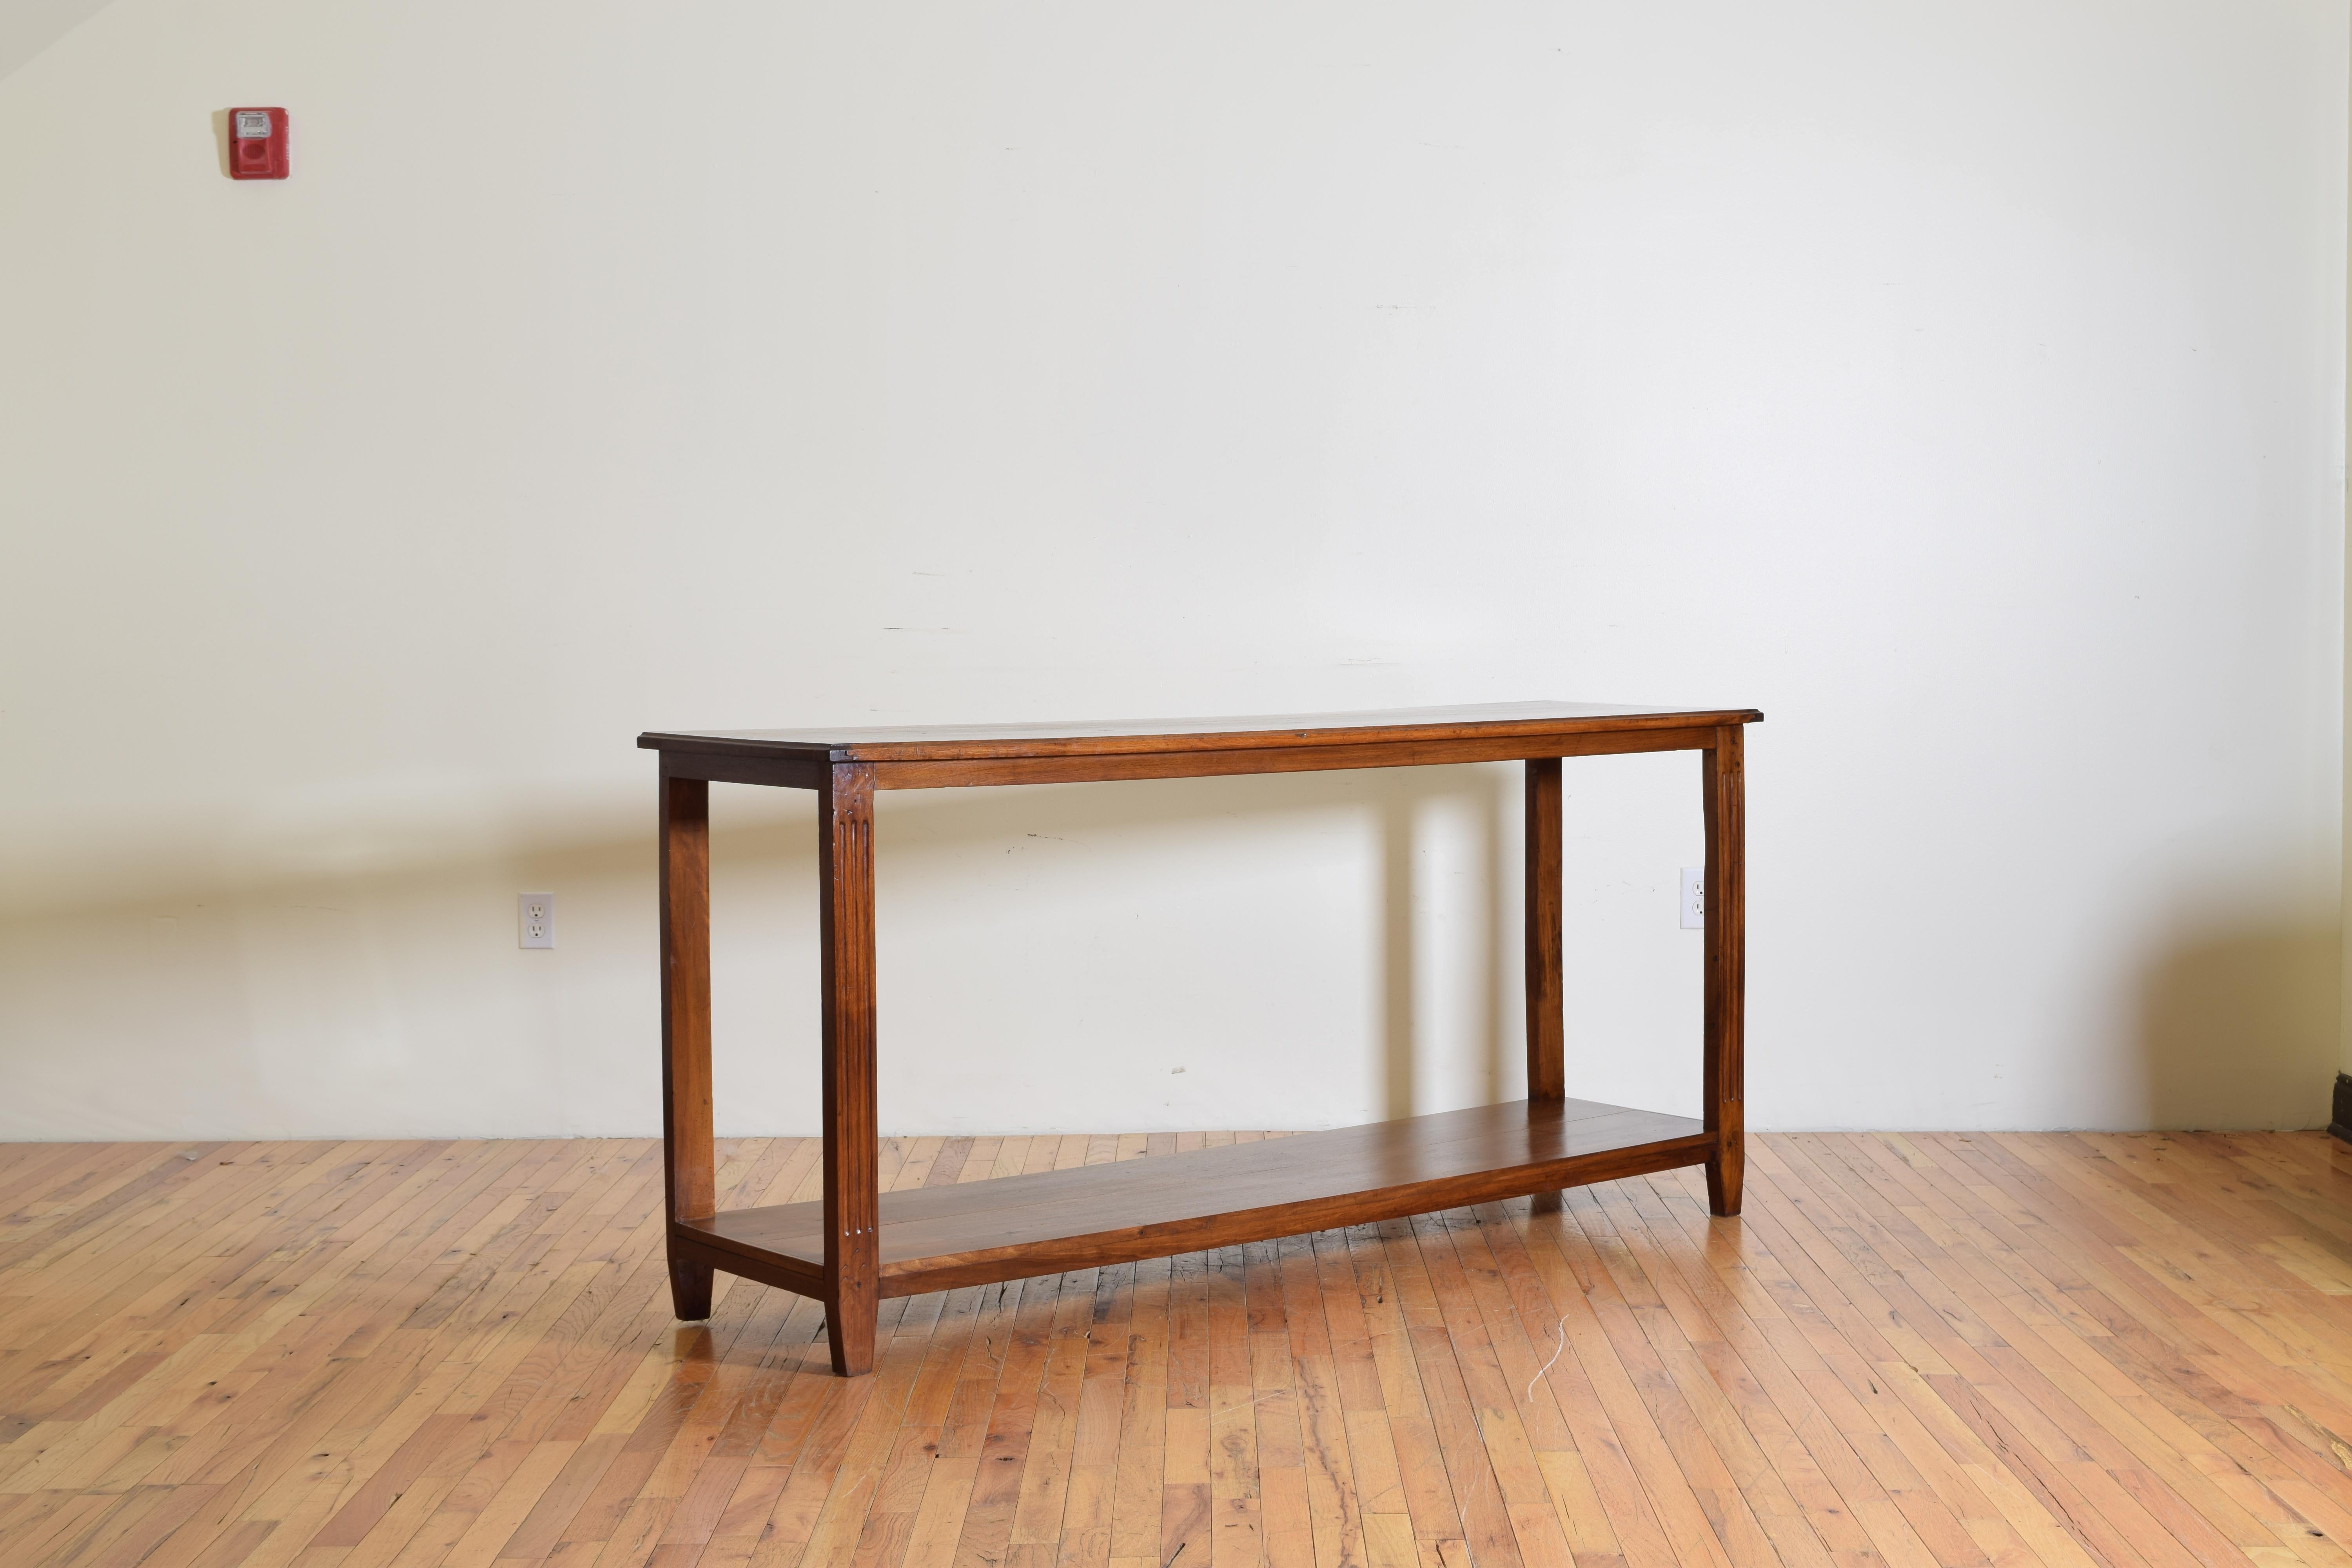 The rectangular top having a molded edge atop a conforming frame raised on slightly tapering fluted front legs and rectangular back legs, with a lower solid walnut shelf.